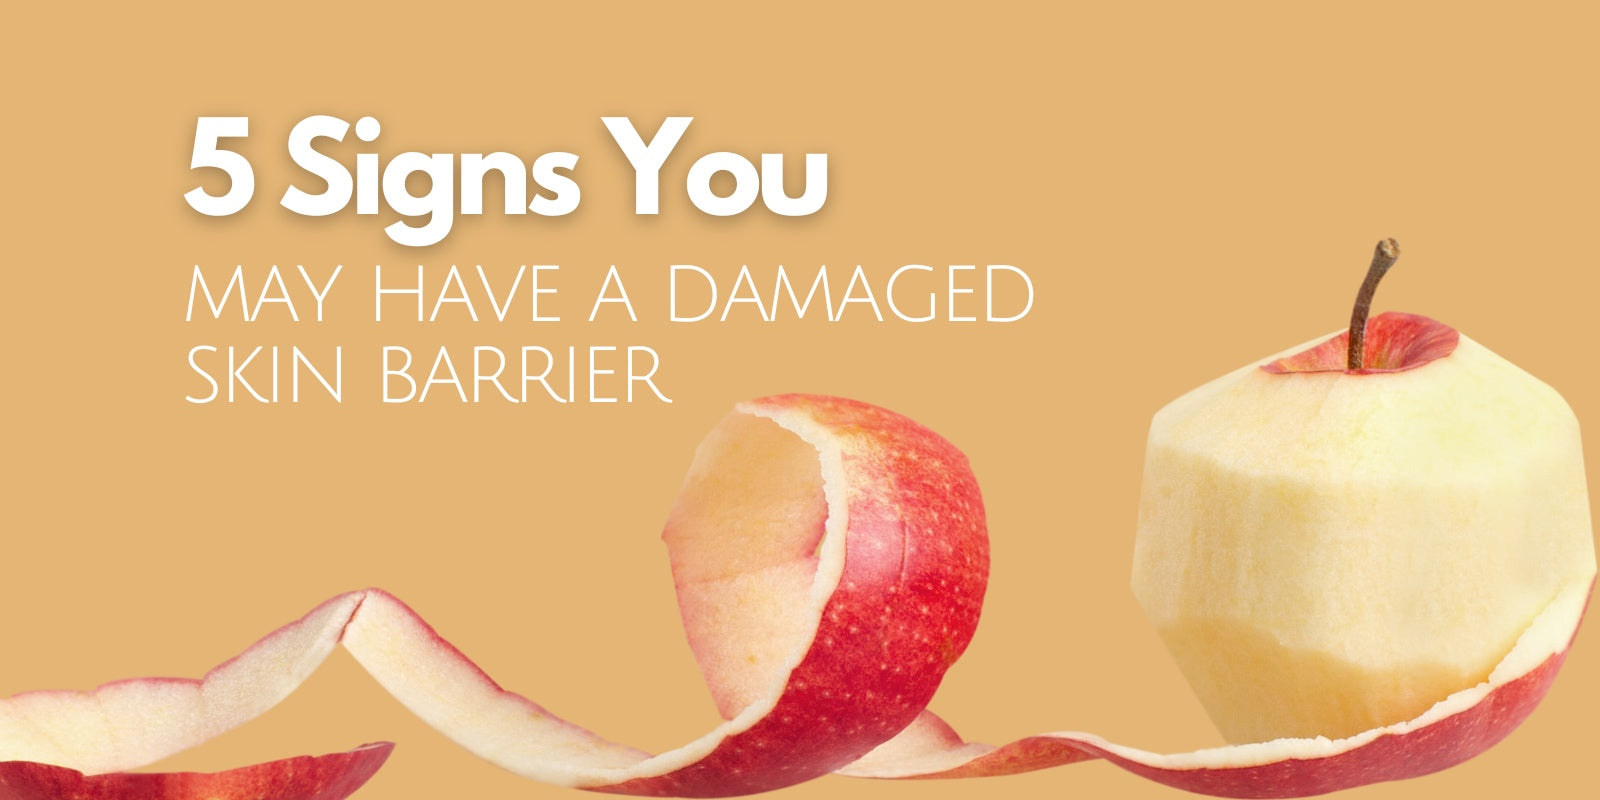 5 signs you have a damaged skin barrier. Victoria BC.